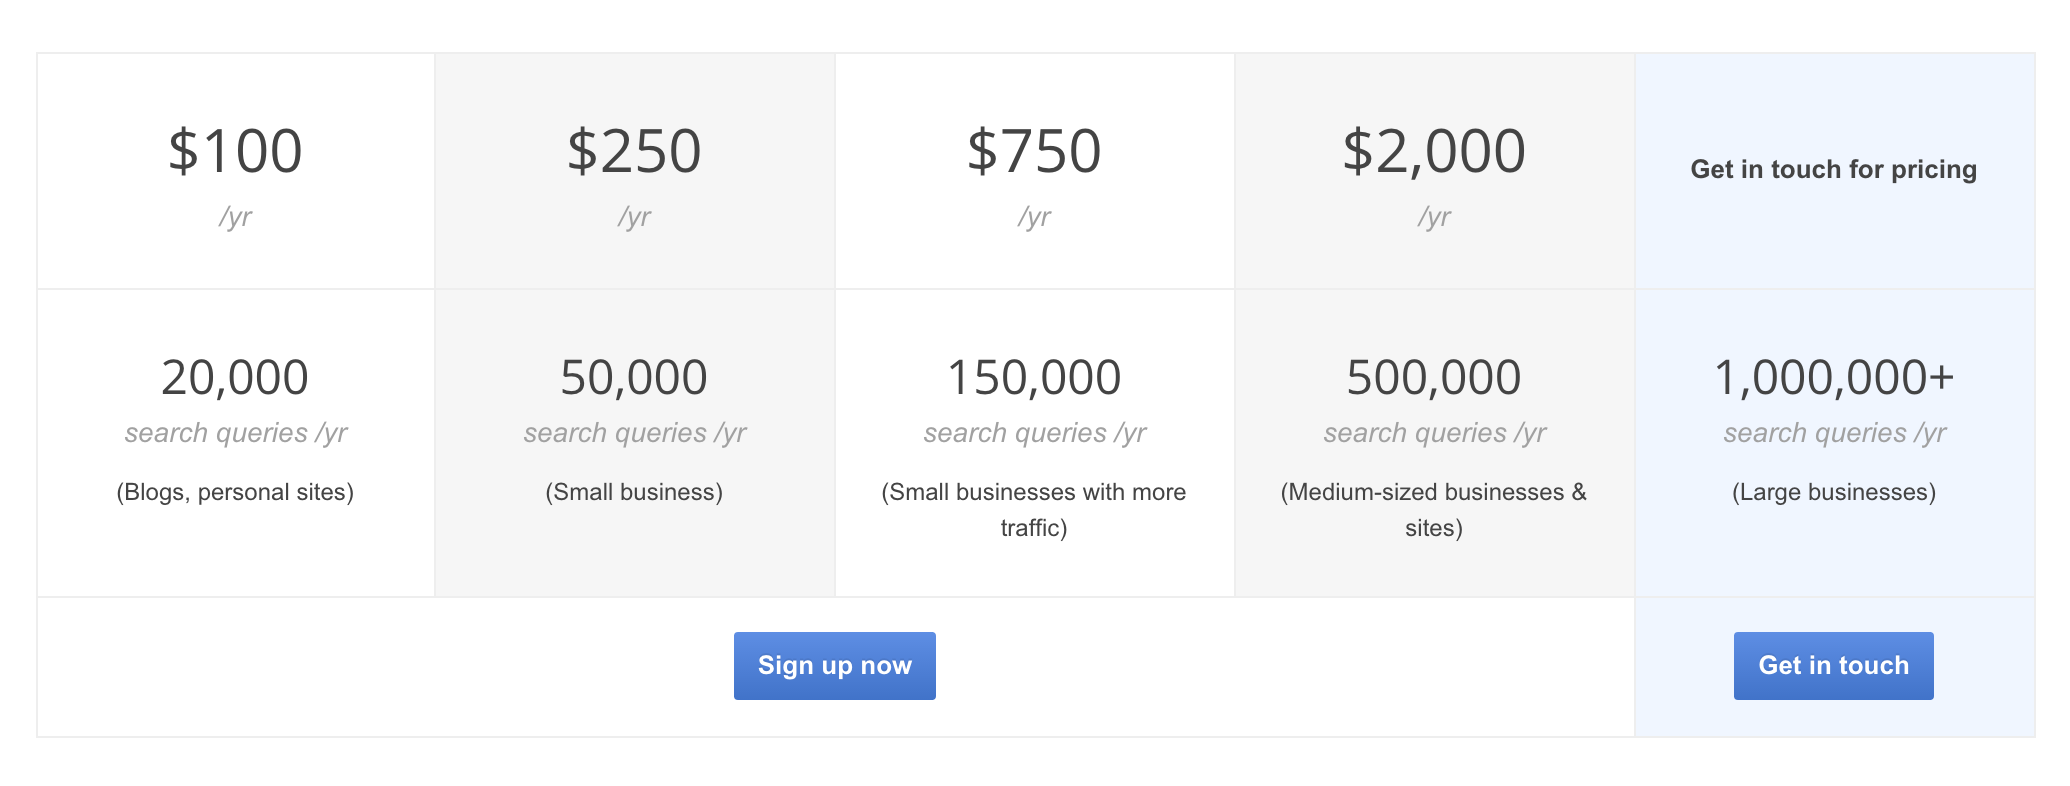 Pricing breakdown of Google Custom Search: $100/year for 20,000 queries through $2,000/year for 500,000 queries